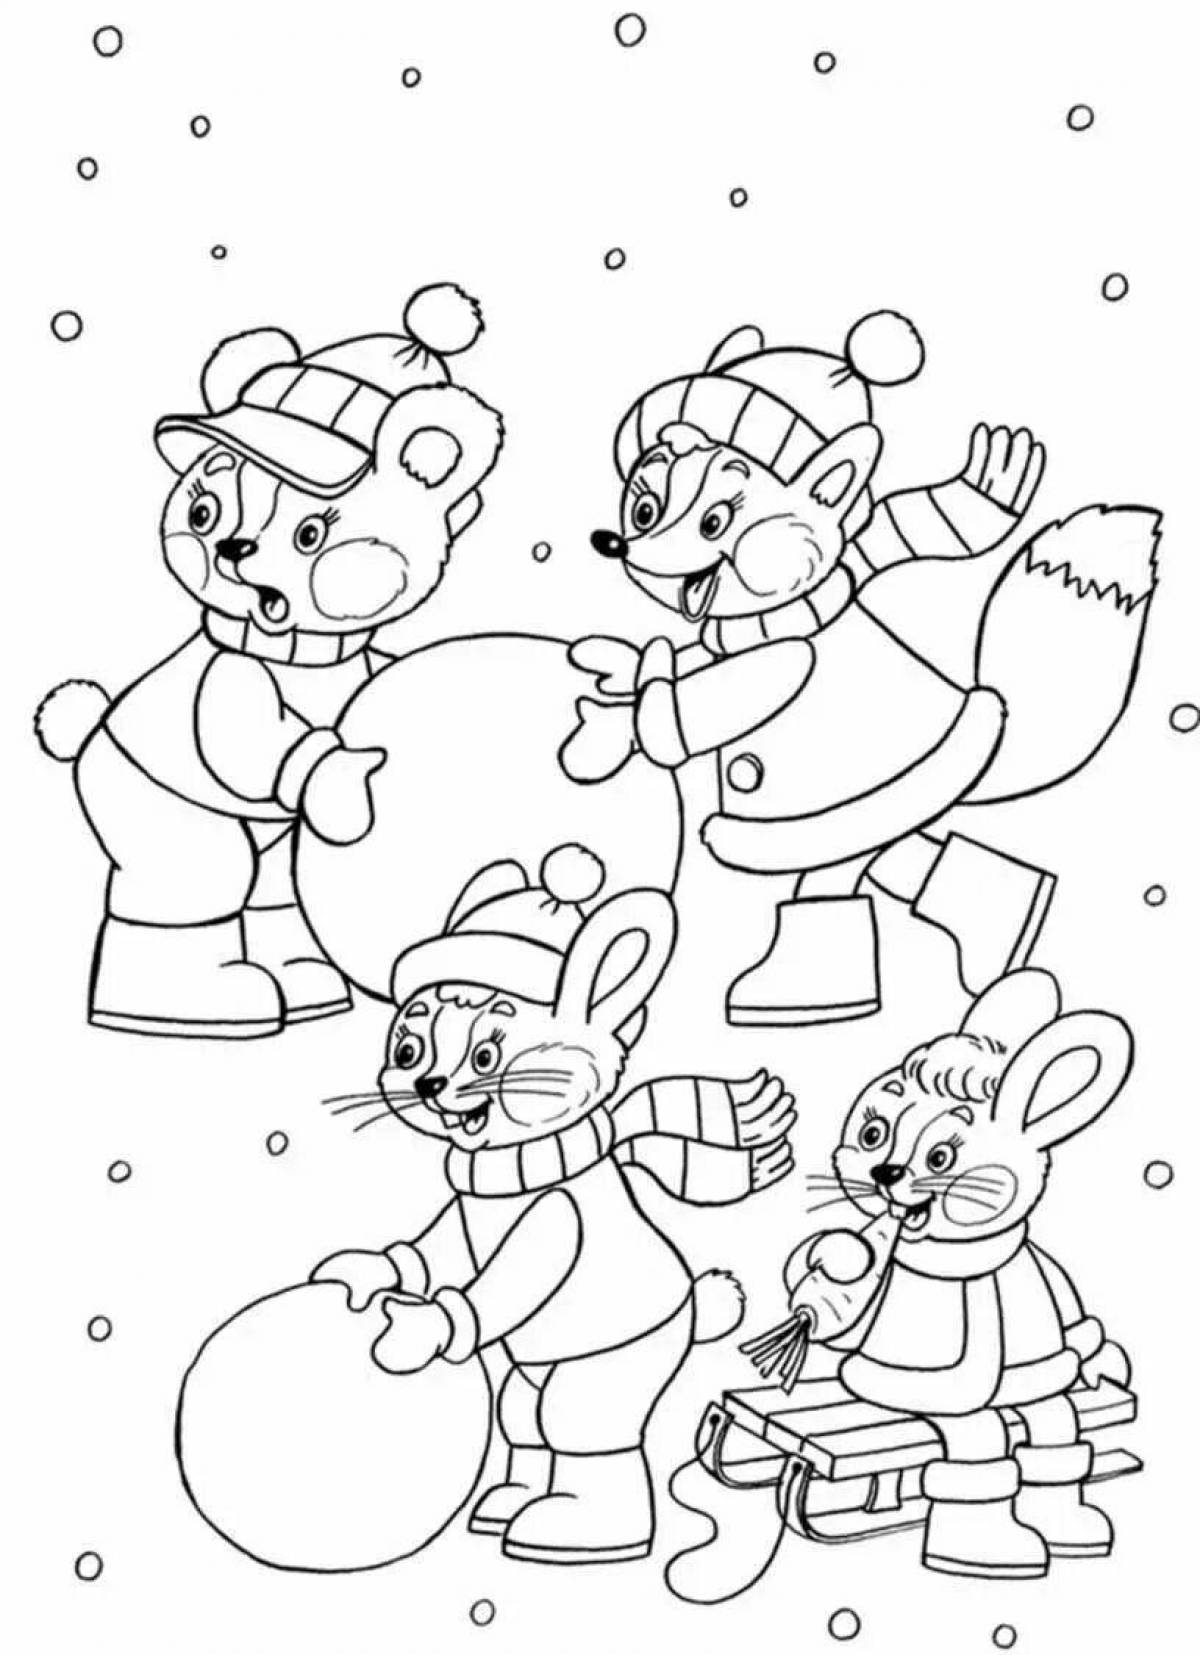 Blissful 5 year old winter coloring book